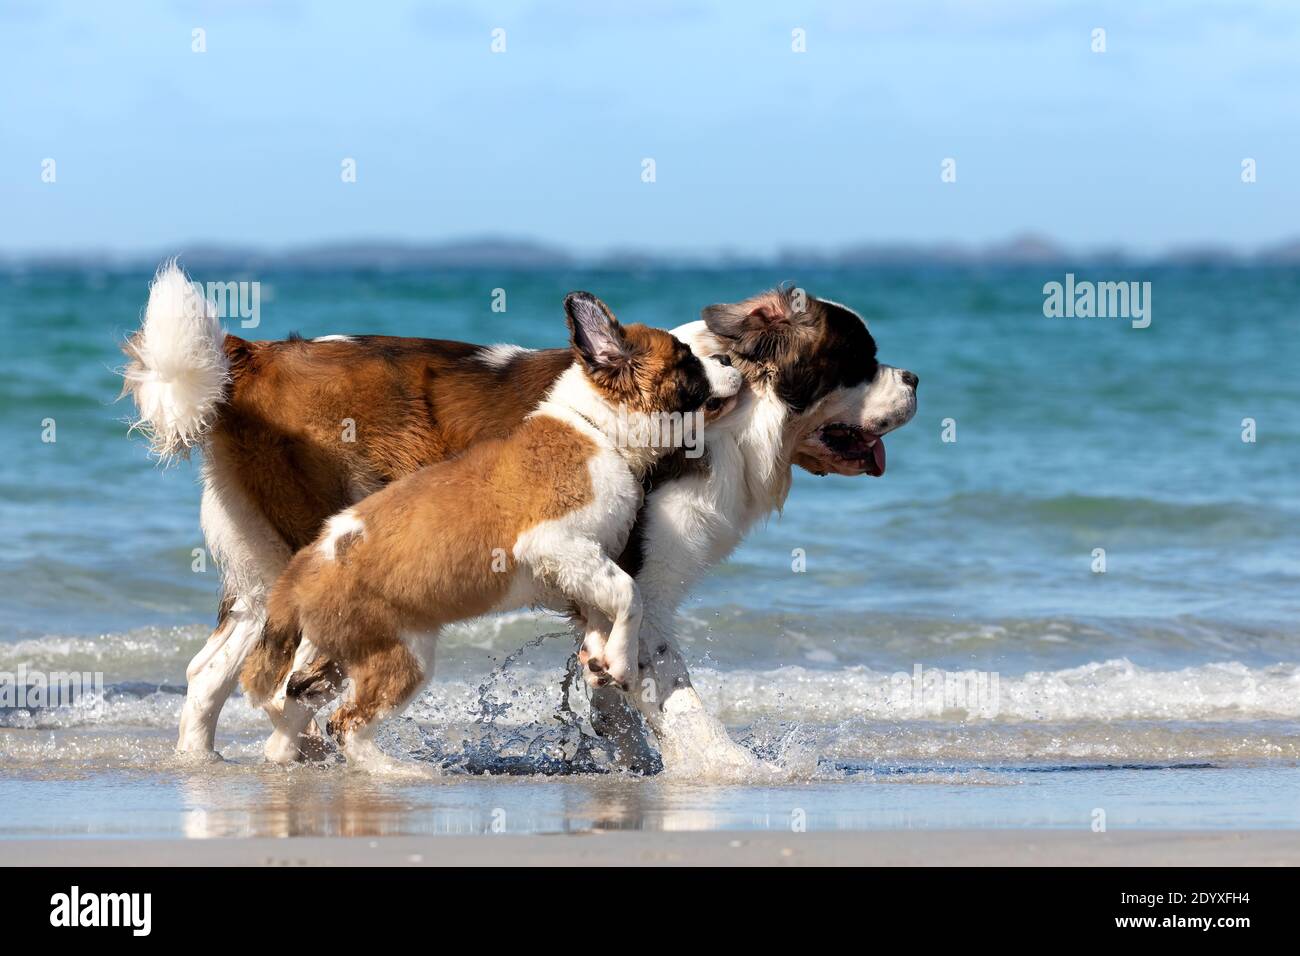 Saint Bernard adult and Saint Bernard puppy playing together in the shallow water at the beach. Stock Photo